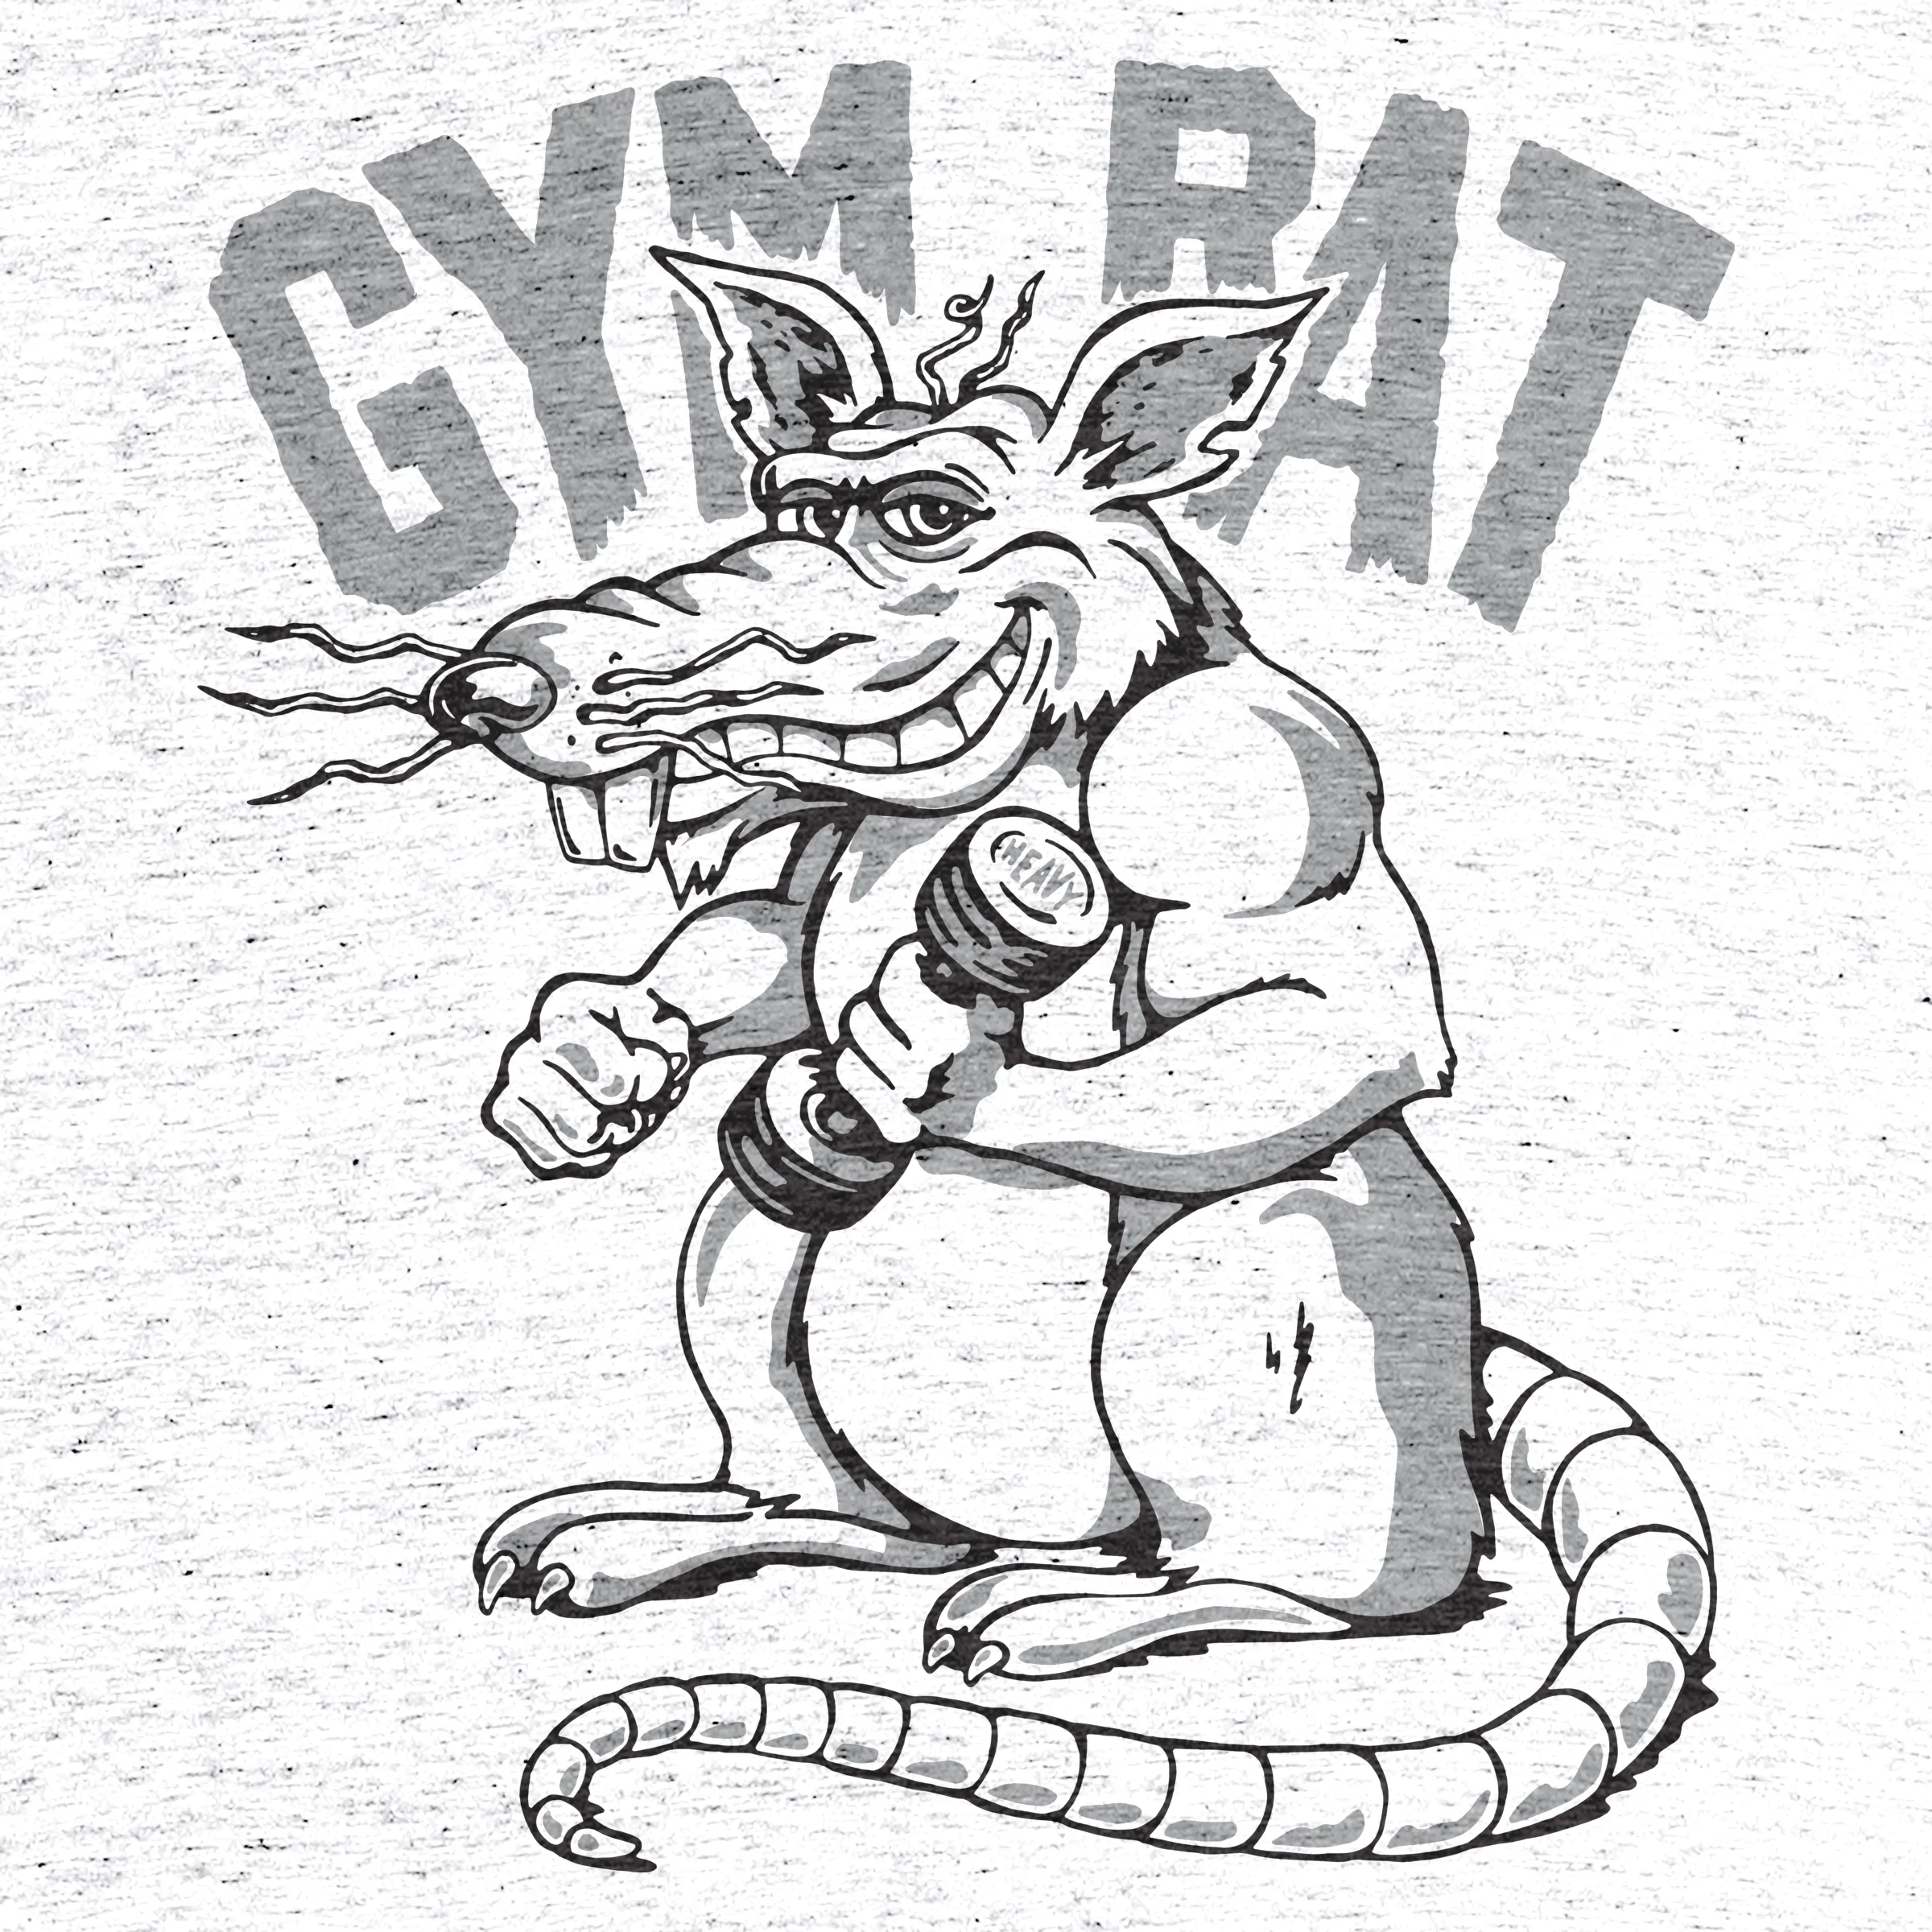 Hardcore Gym Rat” graphic tee, pullover hoodie, tank, onesie, pullover  crewneck, and long sleeve tee by Ben Beaudoin.